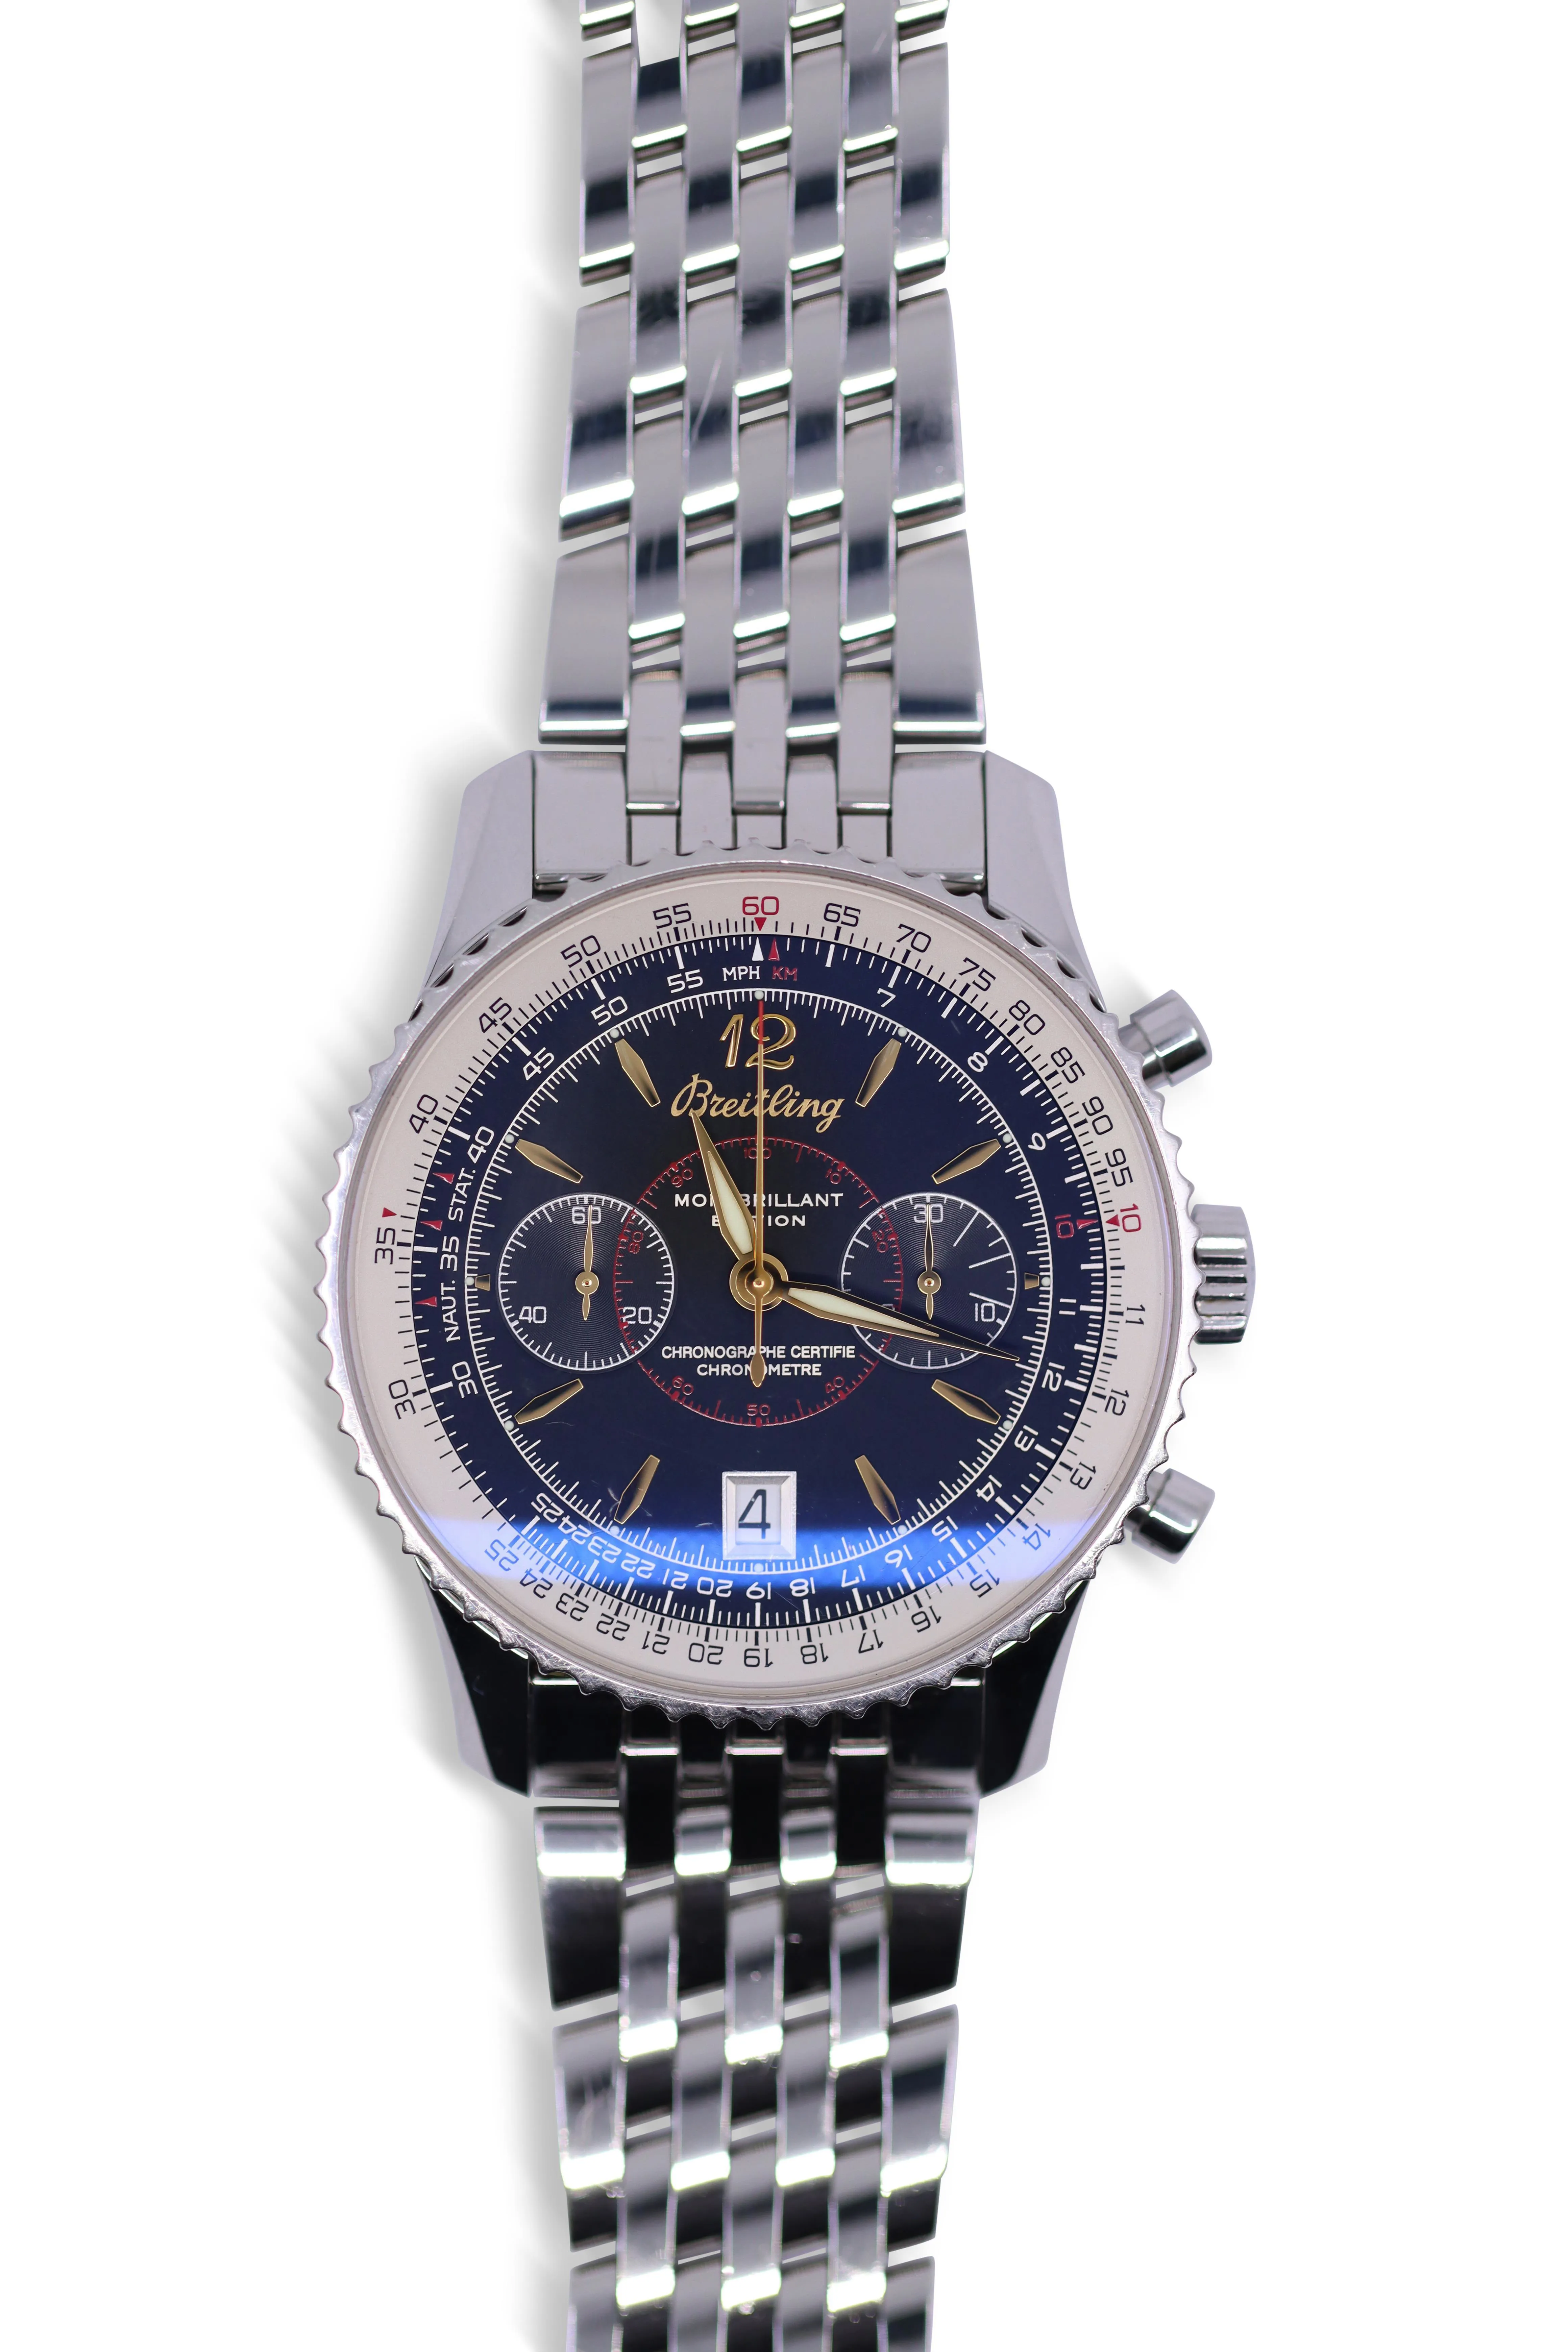 Breitling Montbrillant A48330 43mm Stainless steel Black